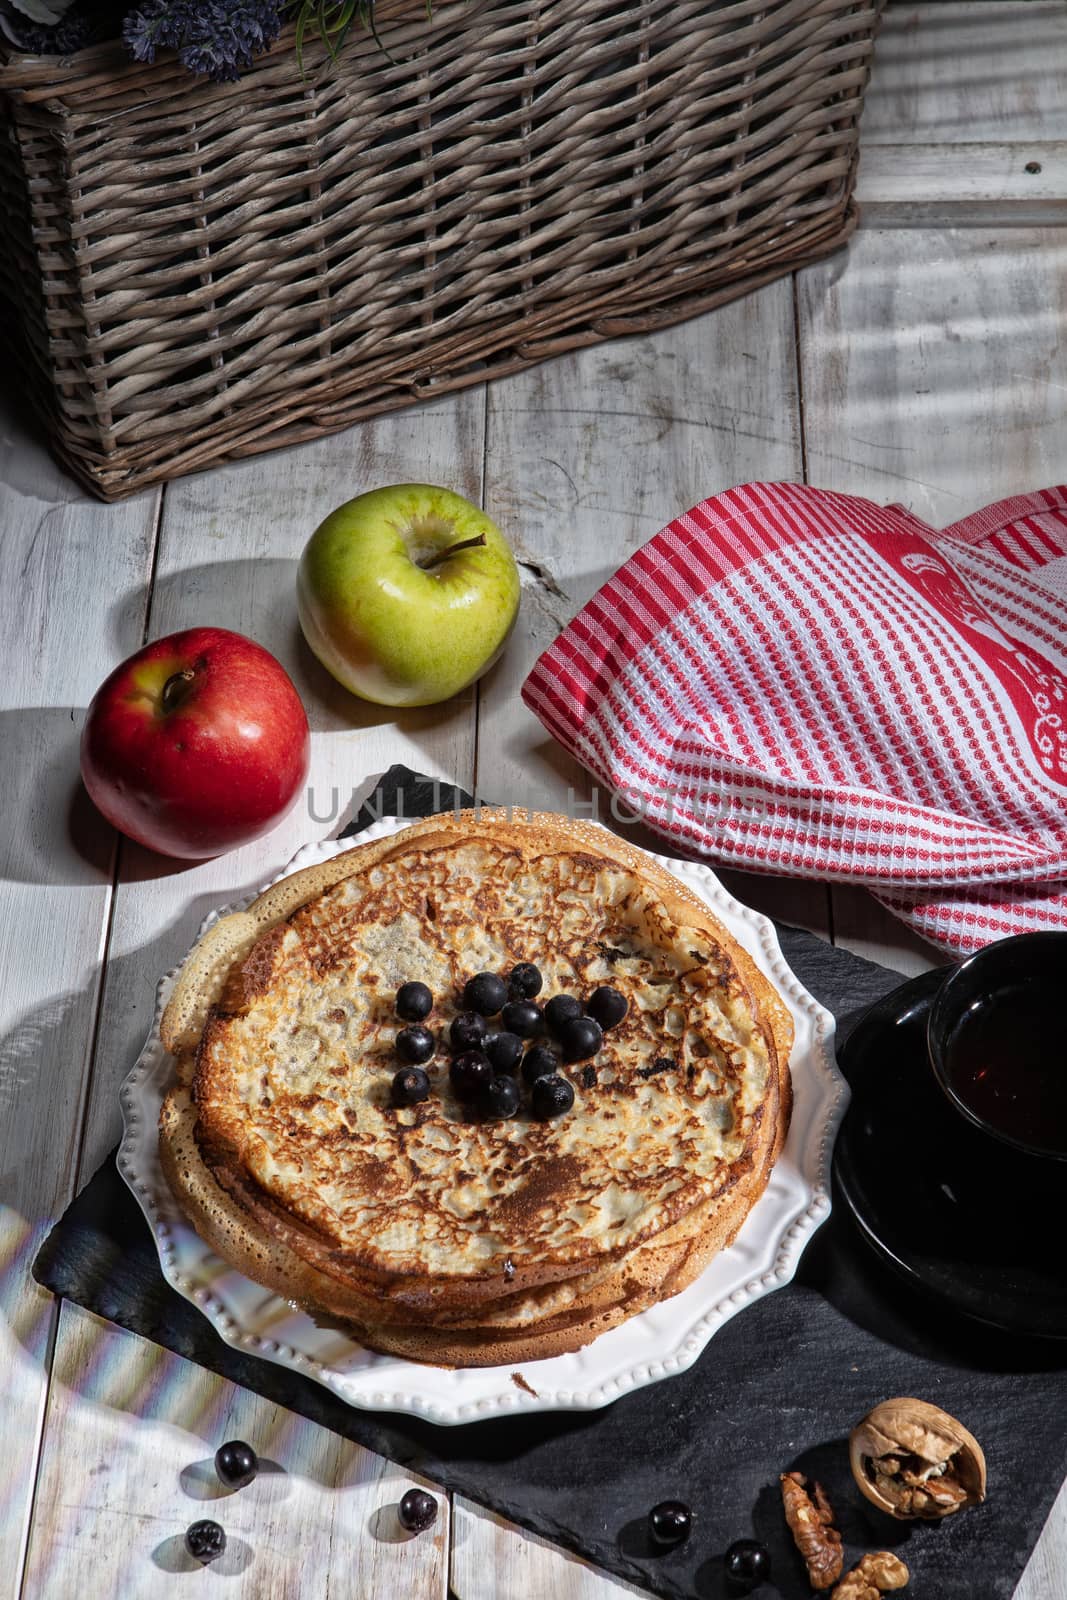 Pancakes, tea, cream and fruits on a fabric background